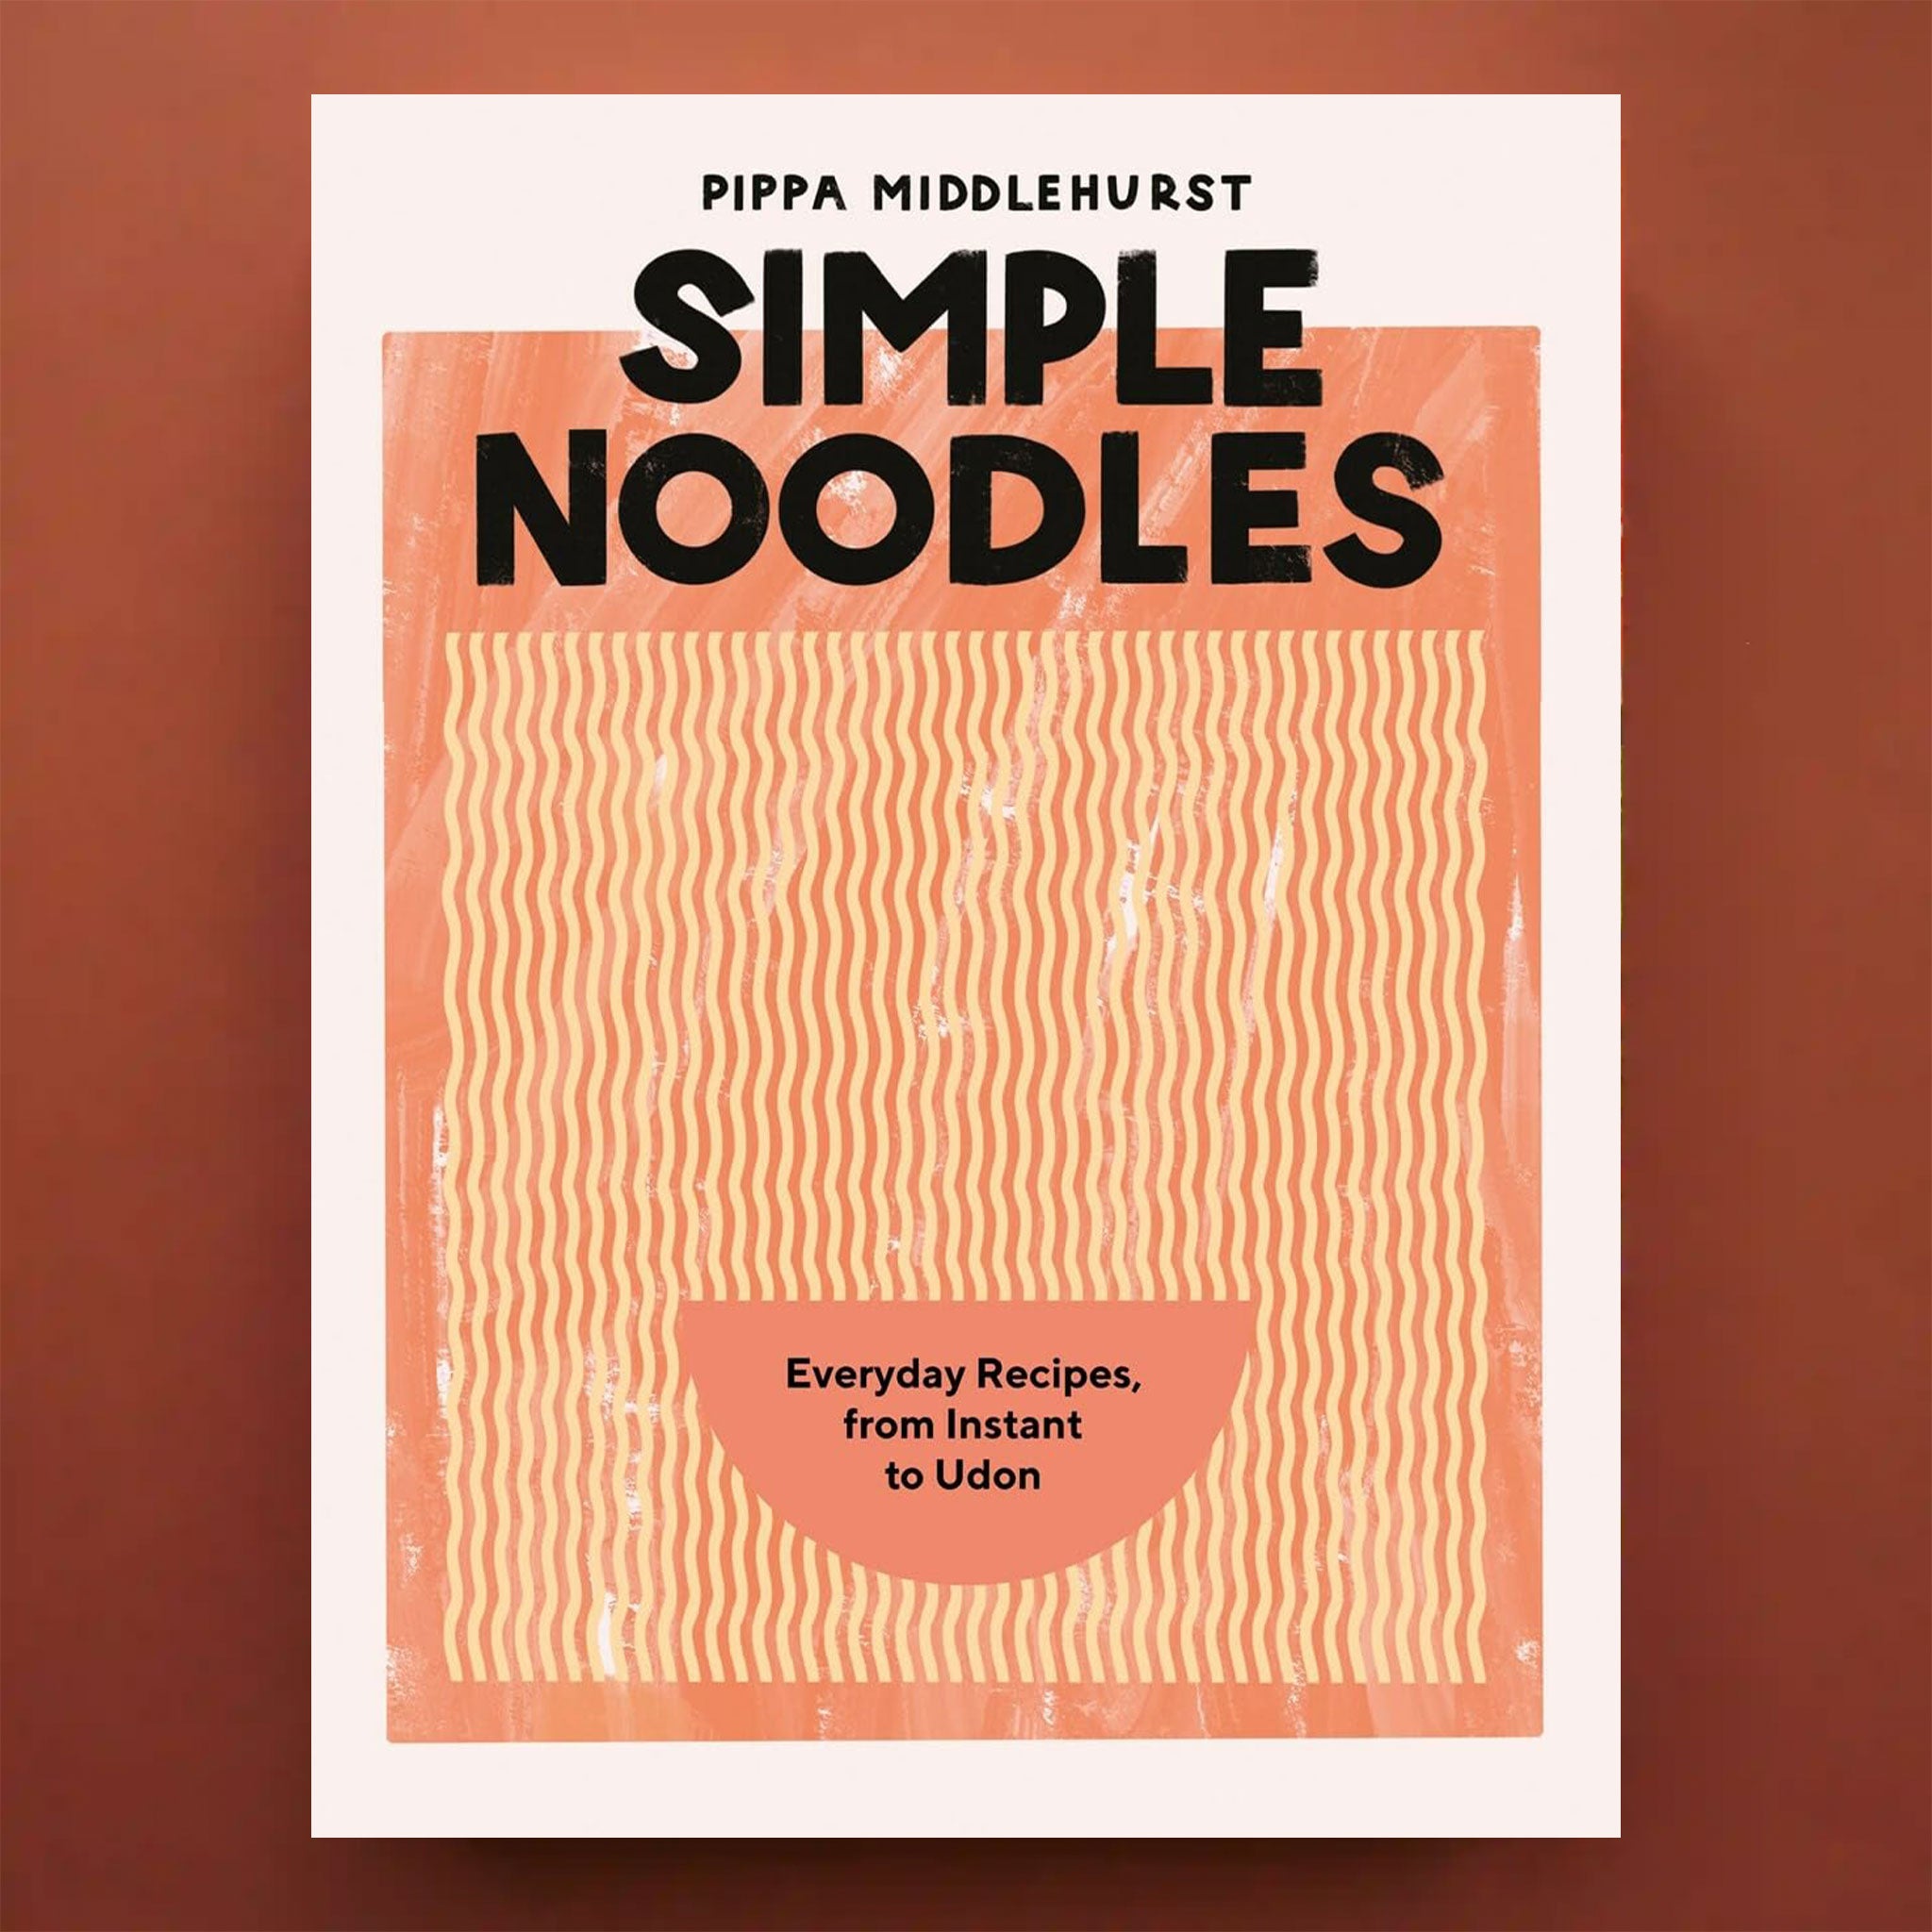 On a brown background is a orange and yellow book cover with a graphic of a bowl of ramen along with black text at the top that reads, "Simple Noodles".